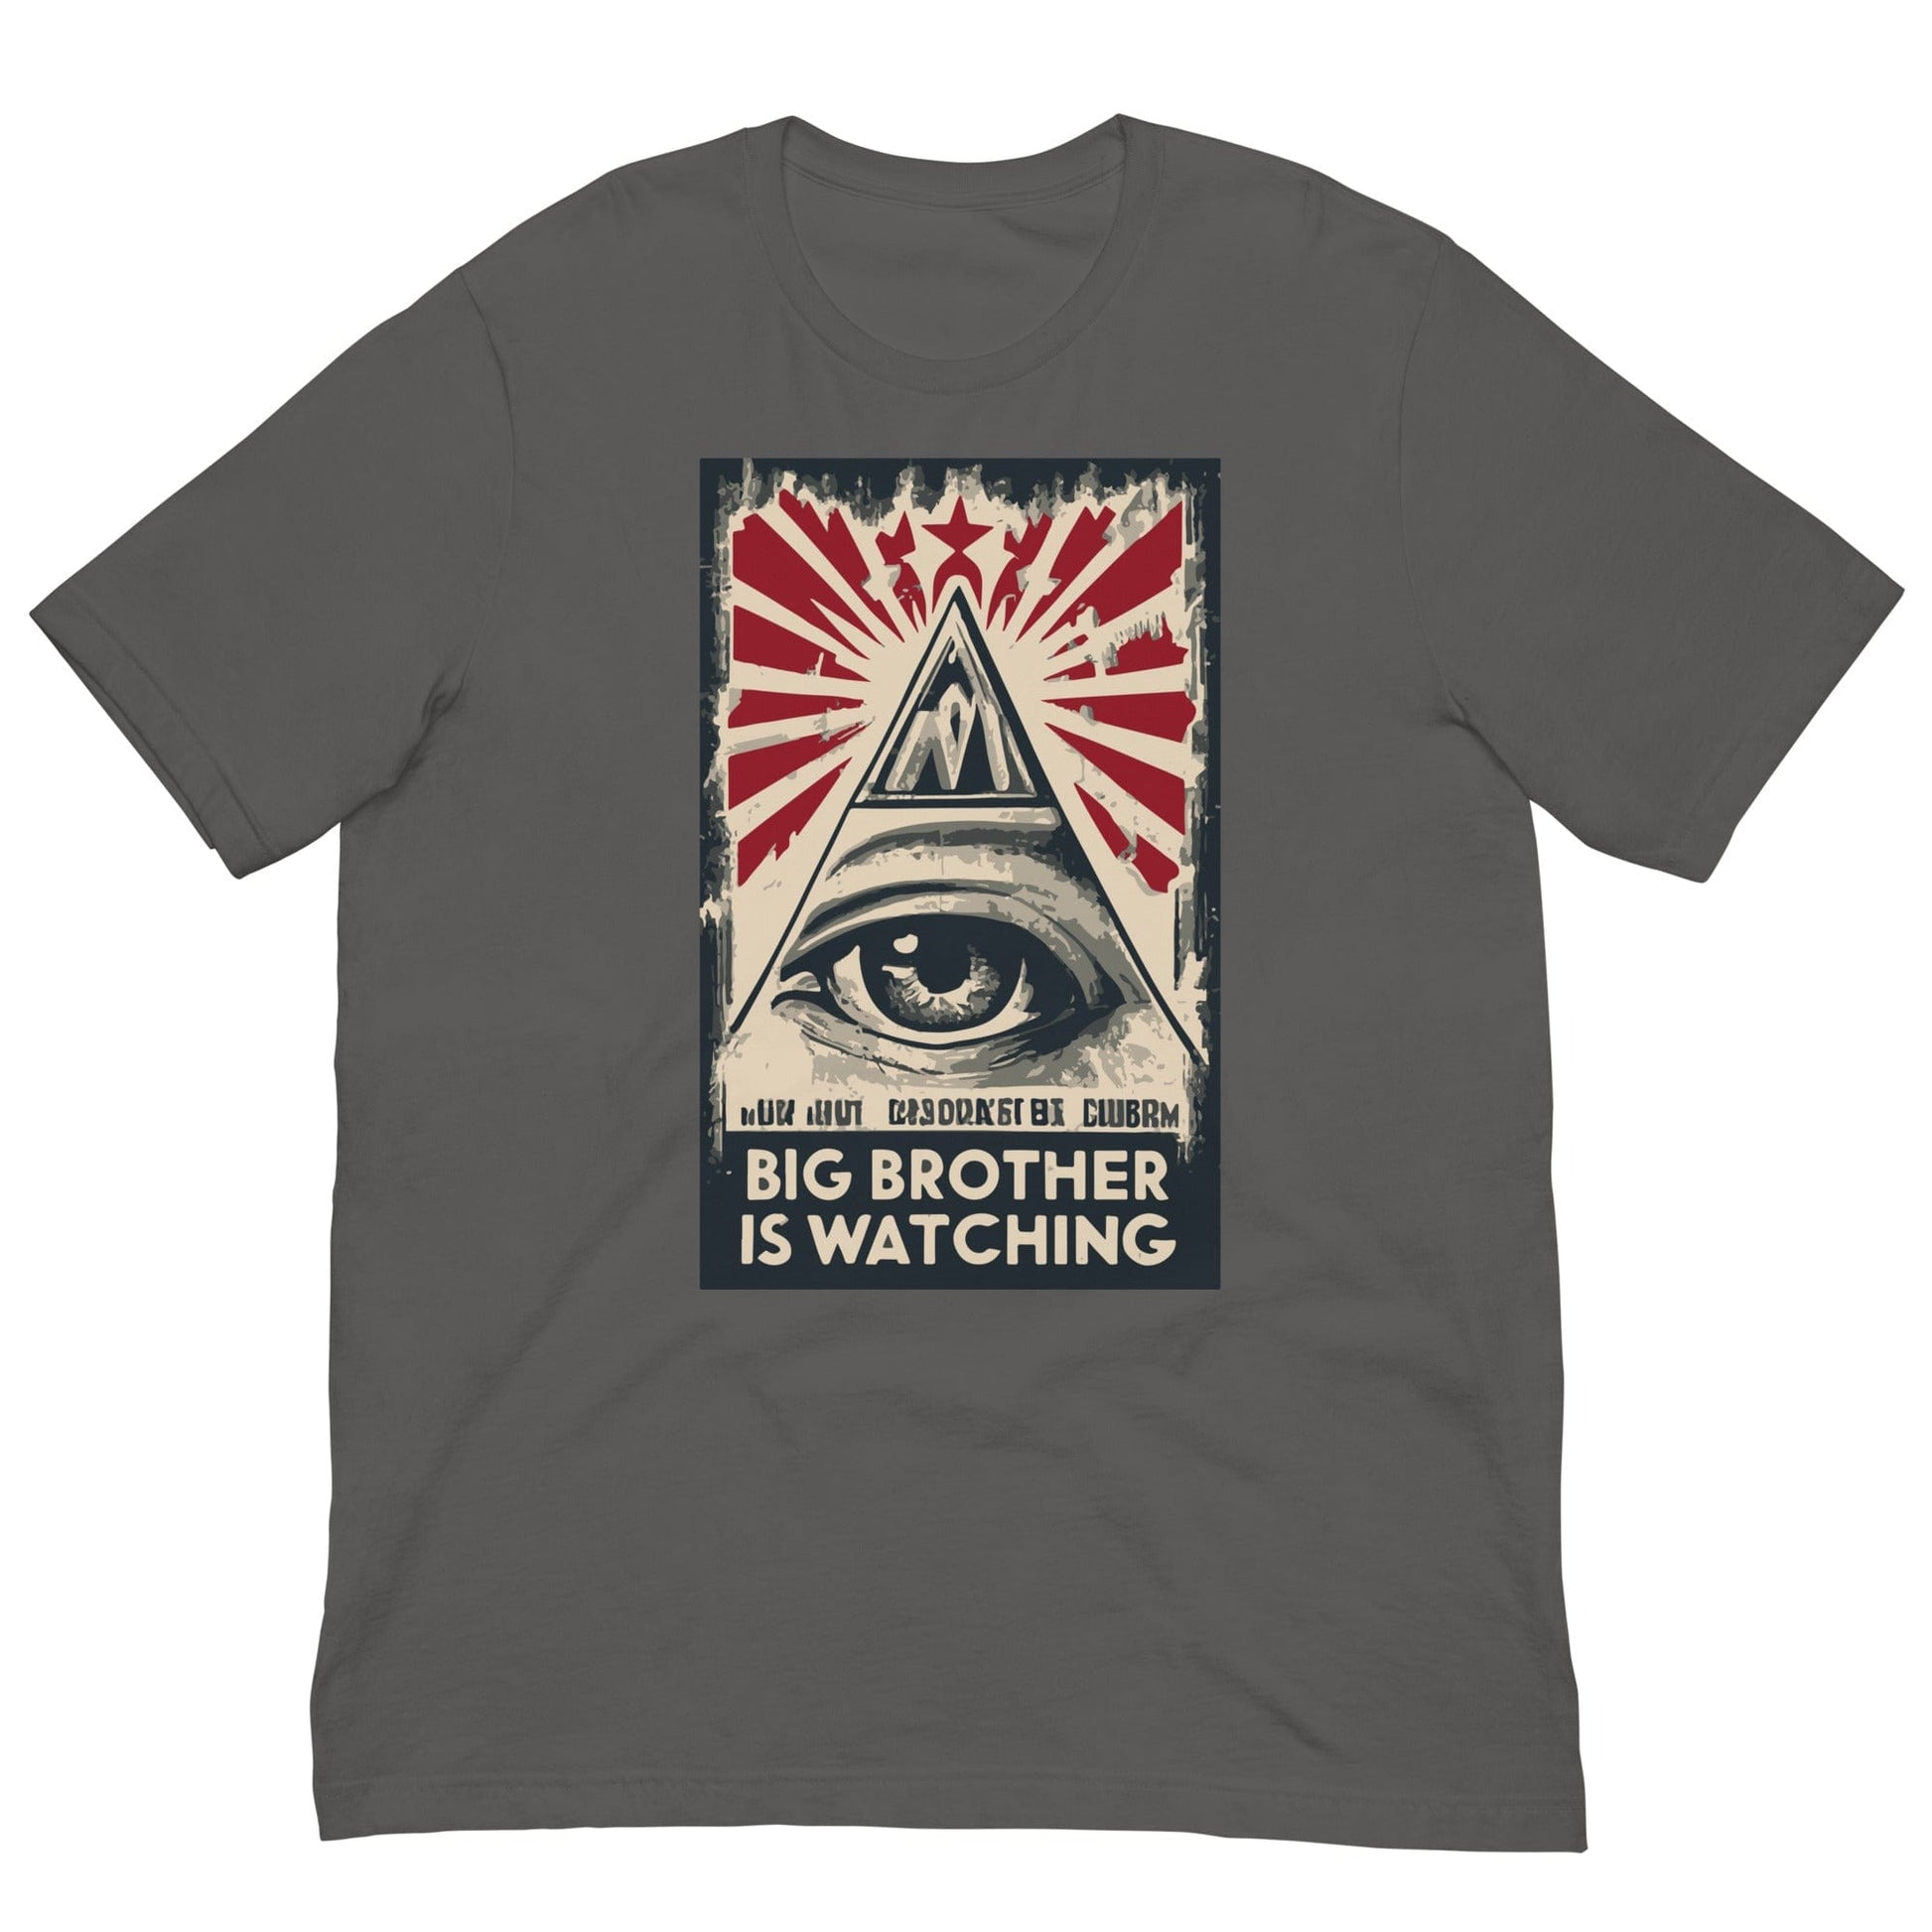 Big Brother is watching T-shirt Asphalt / S